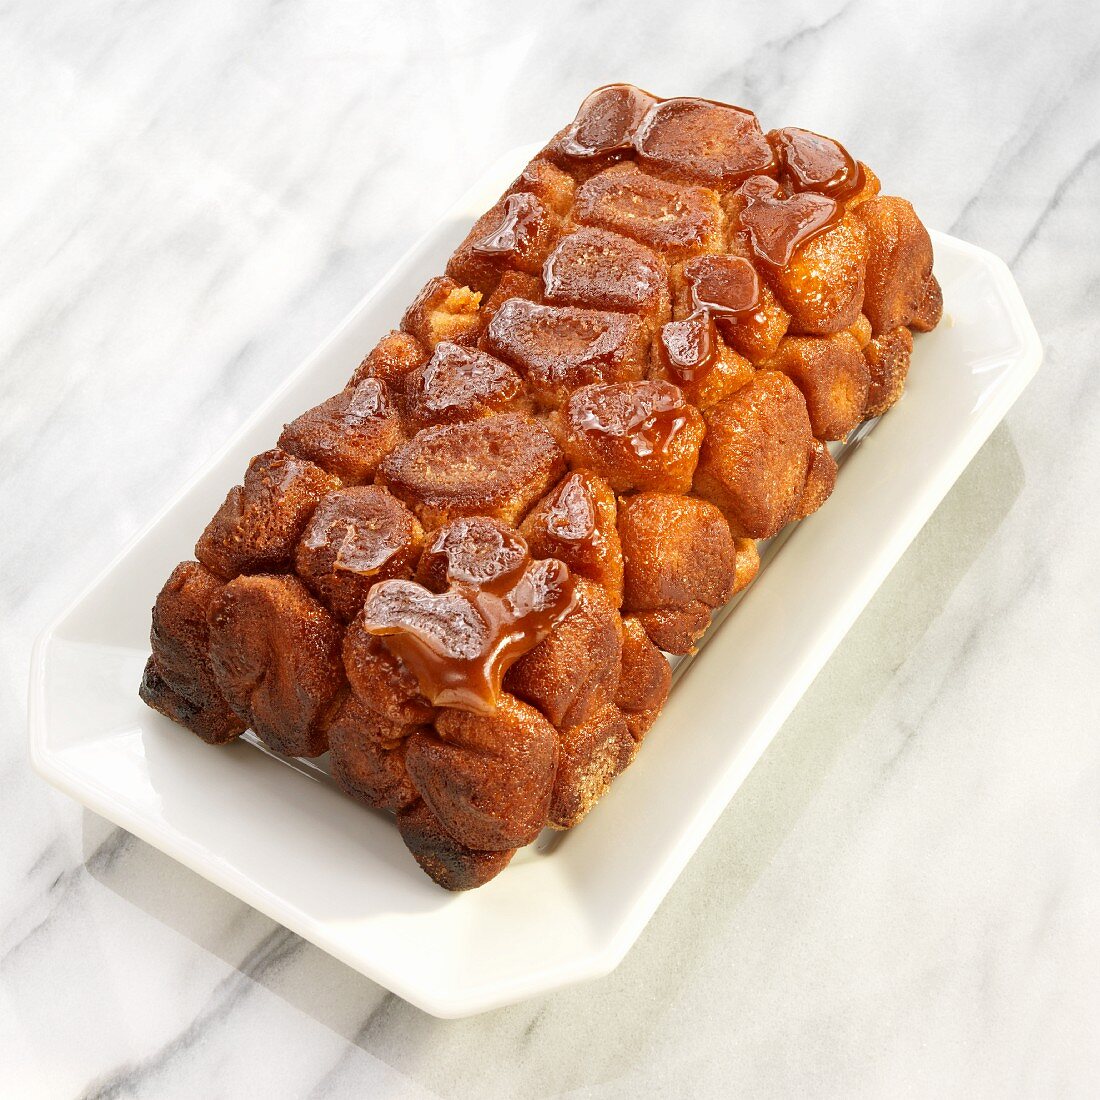 Loaf of Monkey Bread with Caramelized Sugar Topping